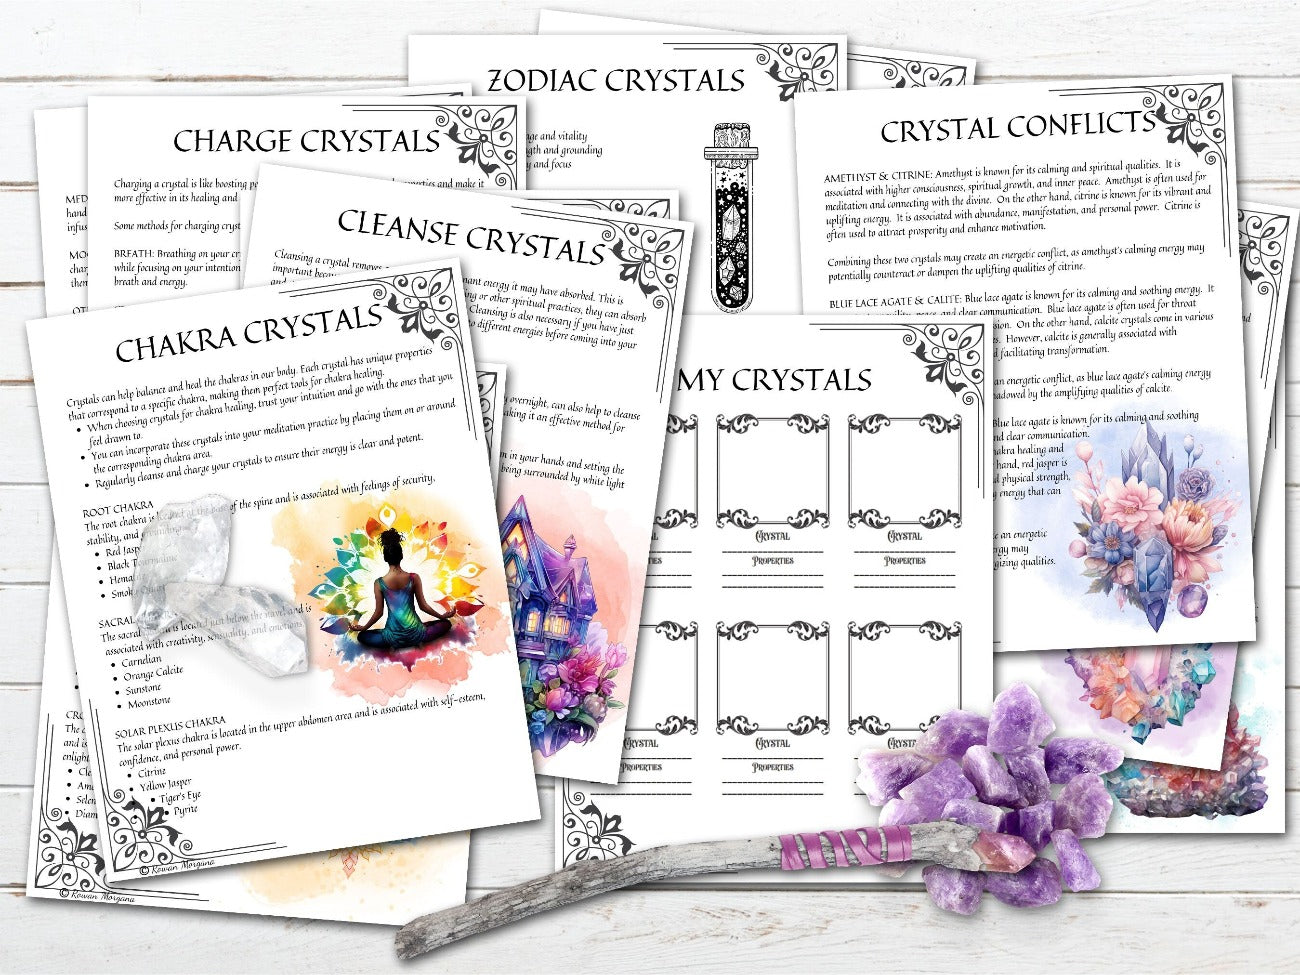 CRYSTAL MAGICK, Cleanse & Charge Crystals, Zodiac Crystals, Crystal Confilcts, Chakra Crystals, & My Crystals Worksheet, Printable pages - Morgana Magick Spell